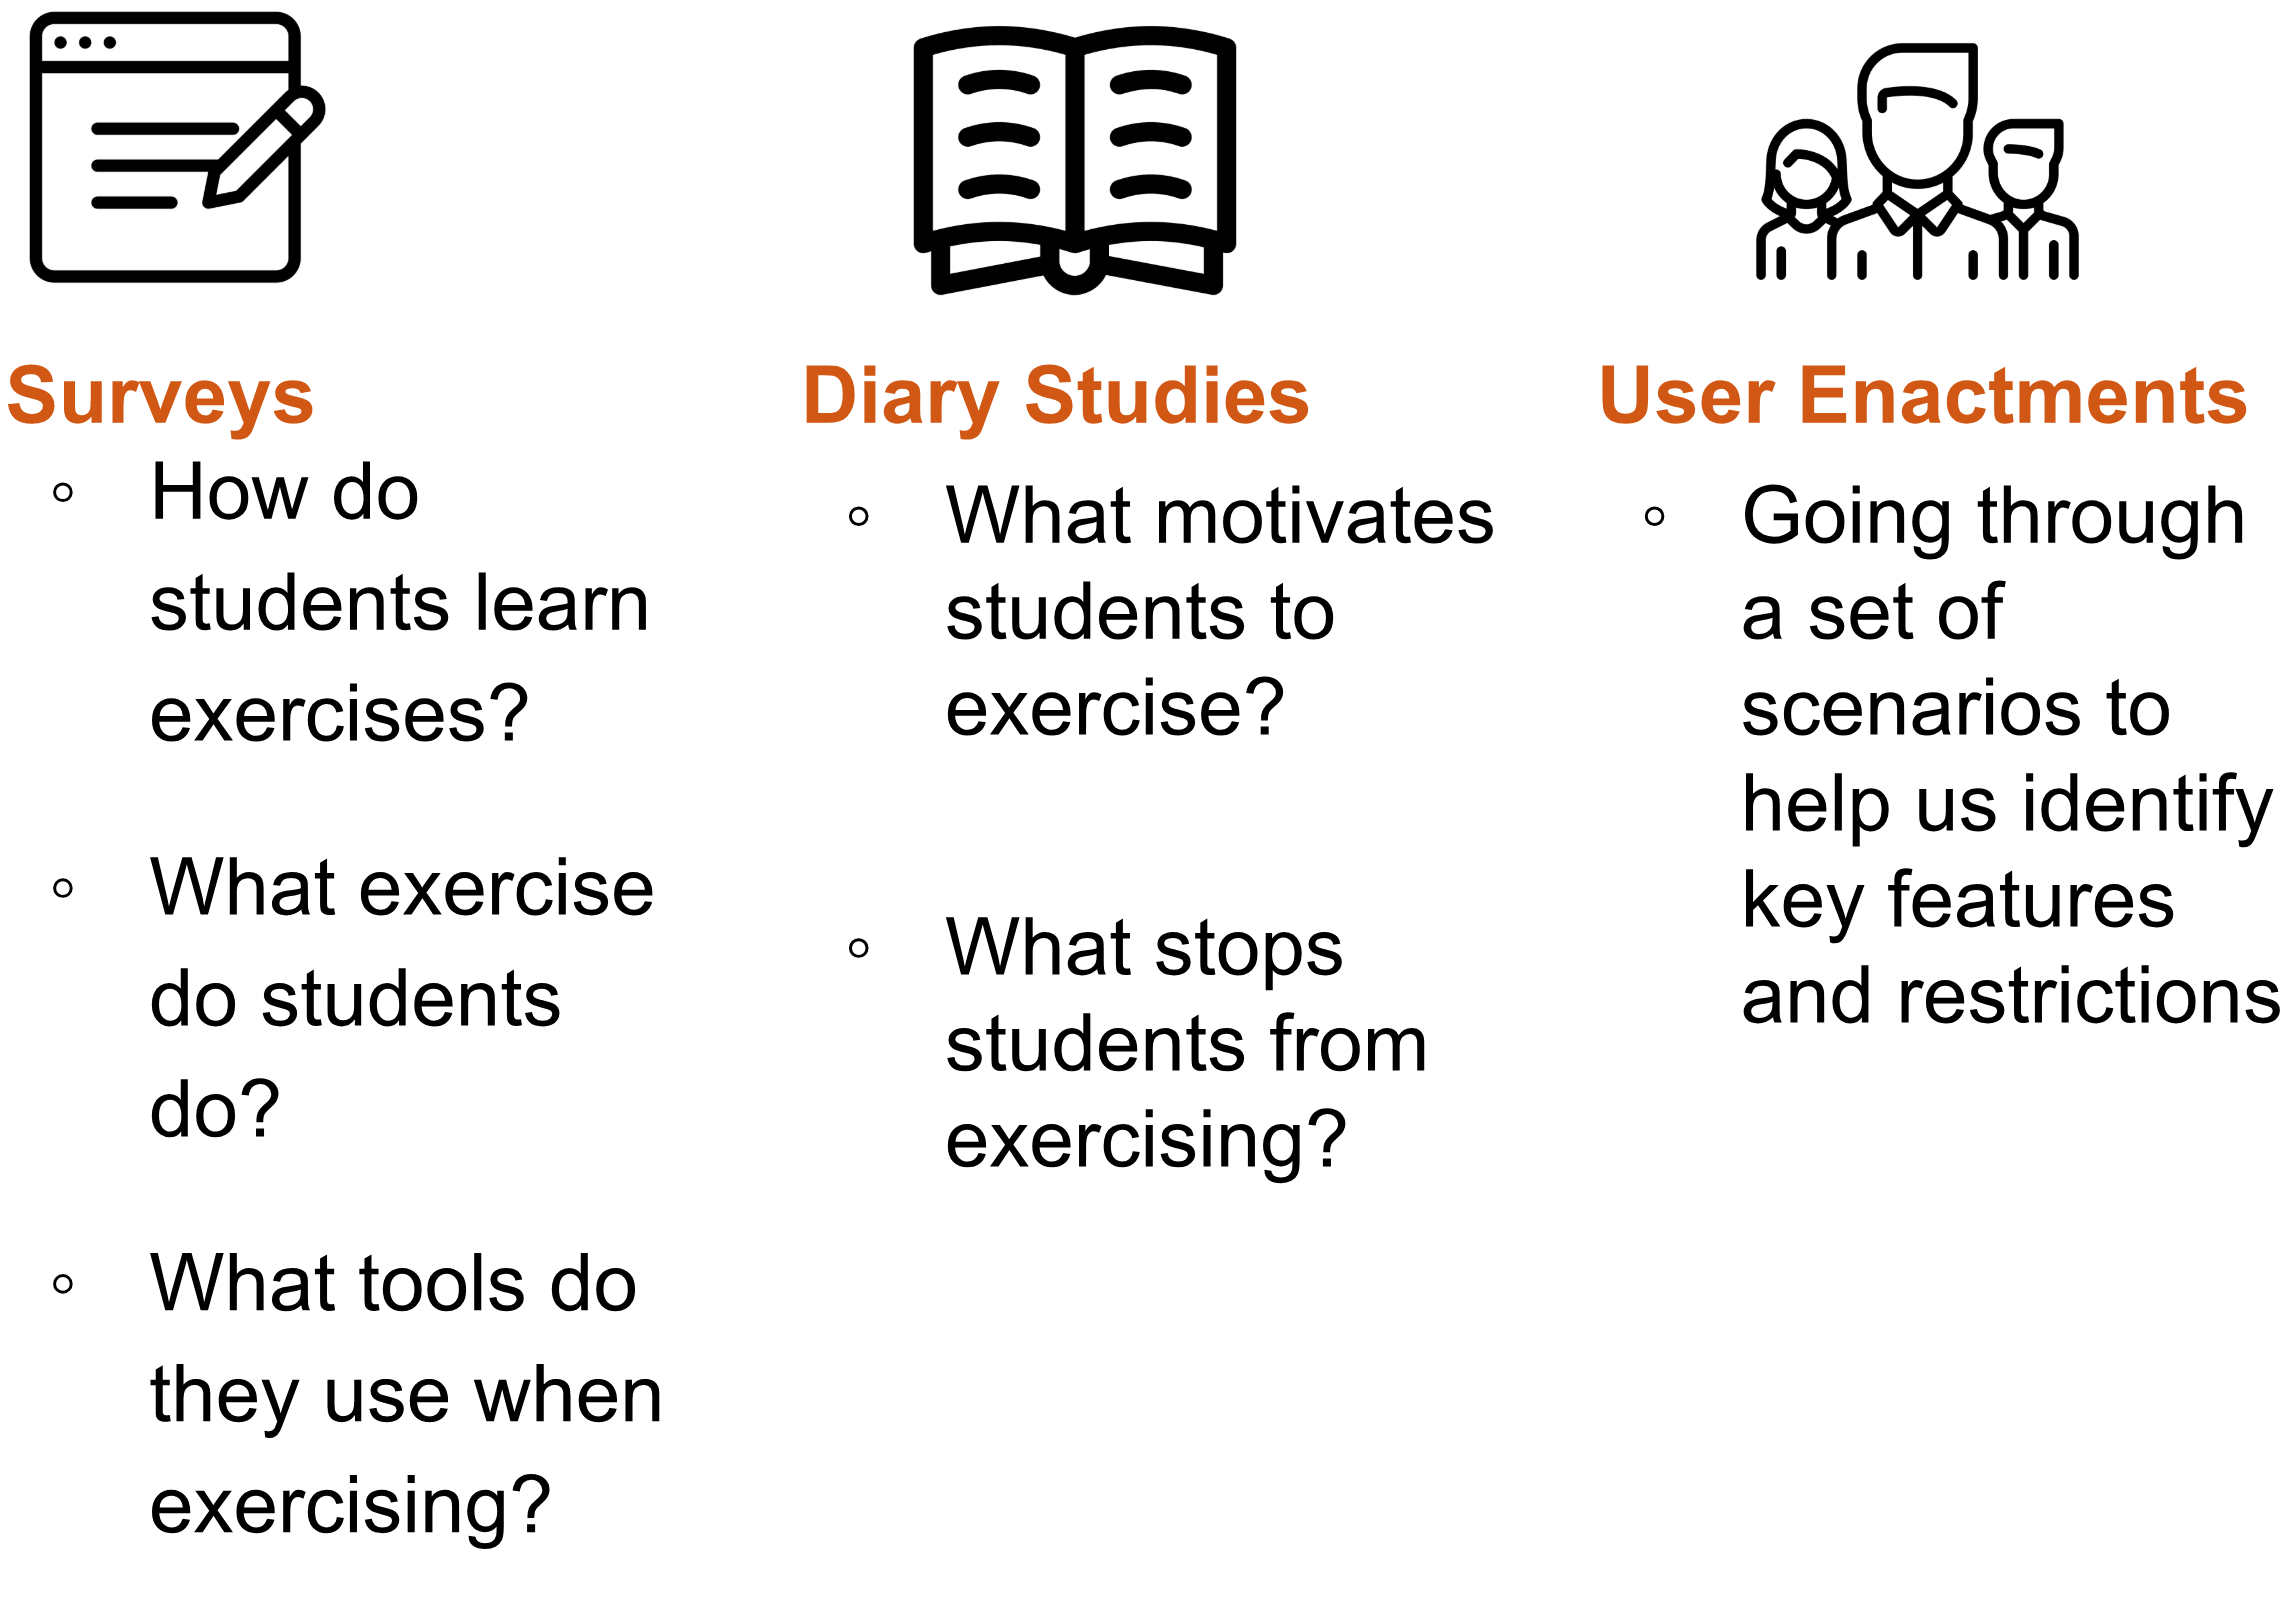 3 main formative study elements:  Surveys, Diary Studies, and User Enactments